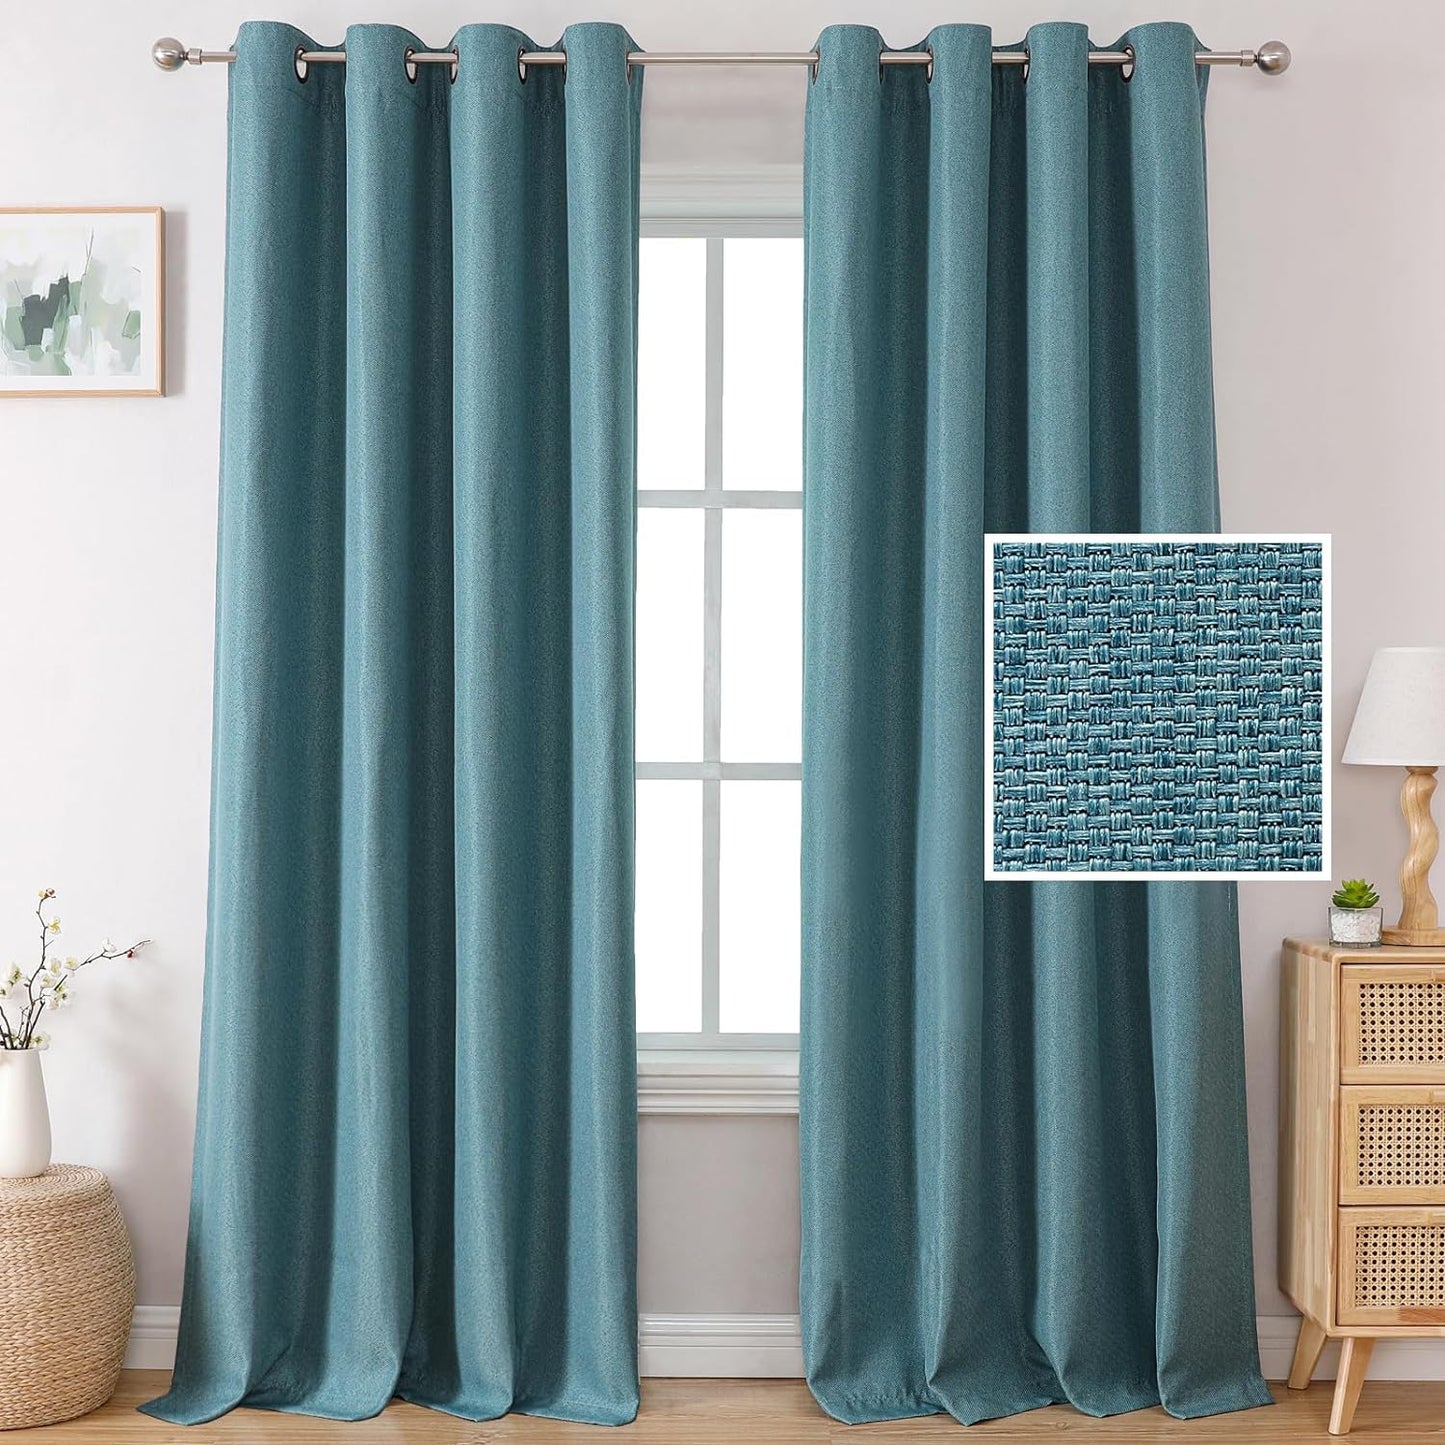 H.VERSAILTEX Linen Blackout Curtains 84 Inches Long Thermal Insulated Room Darkening Linen Curtains for Bedroom Textured Burlap Grommet Window Curtains for Living Room, Bluestone and Taupe, 2 Panels  H.VERSAILTEX Aegean Blue 52"W X 96"L 